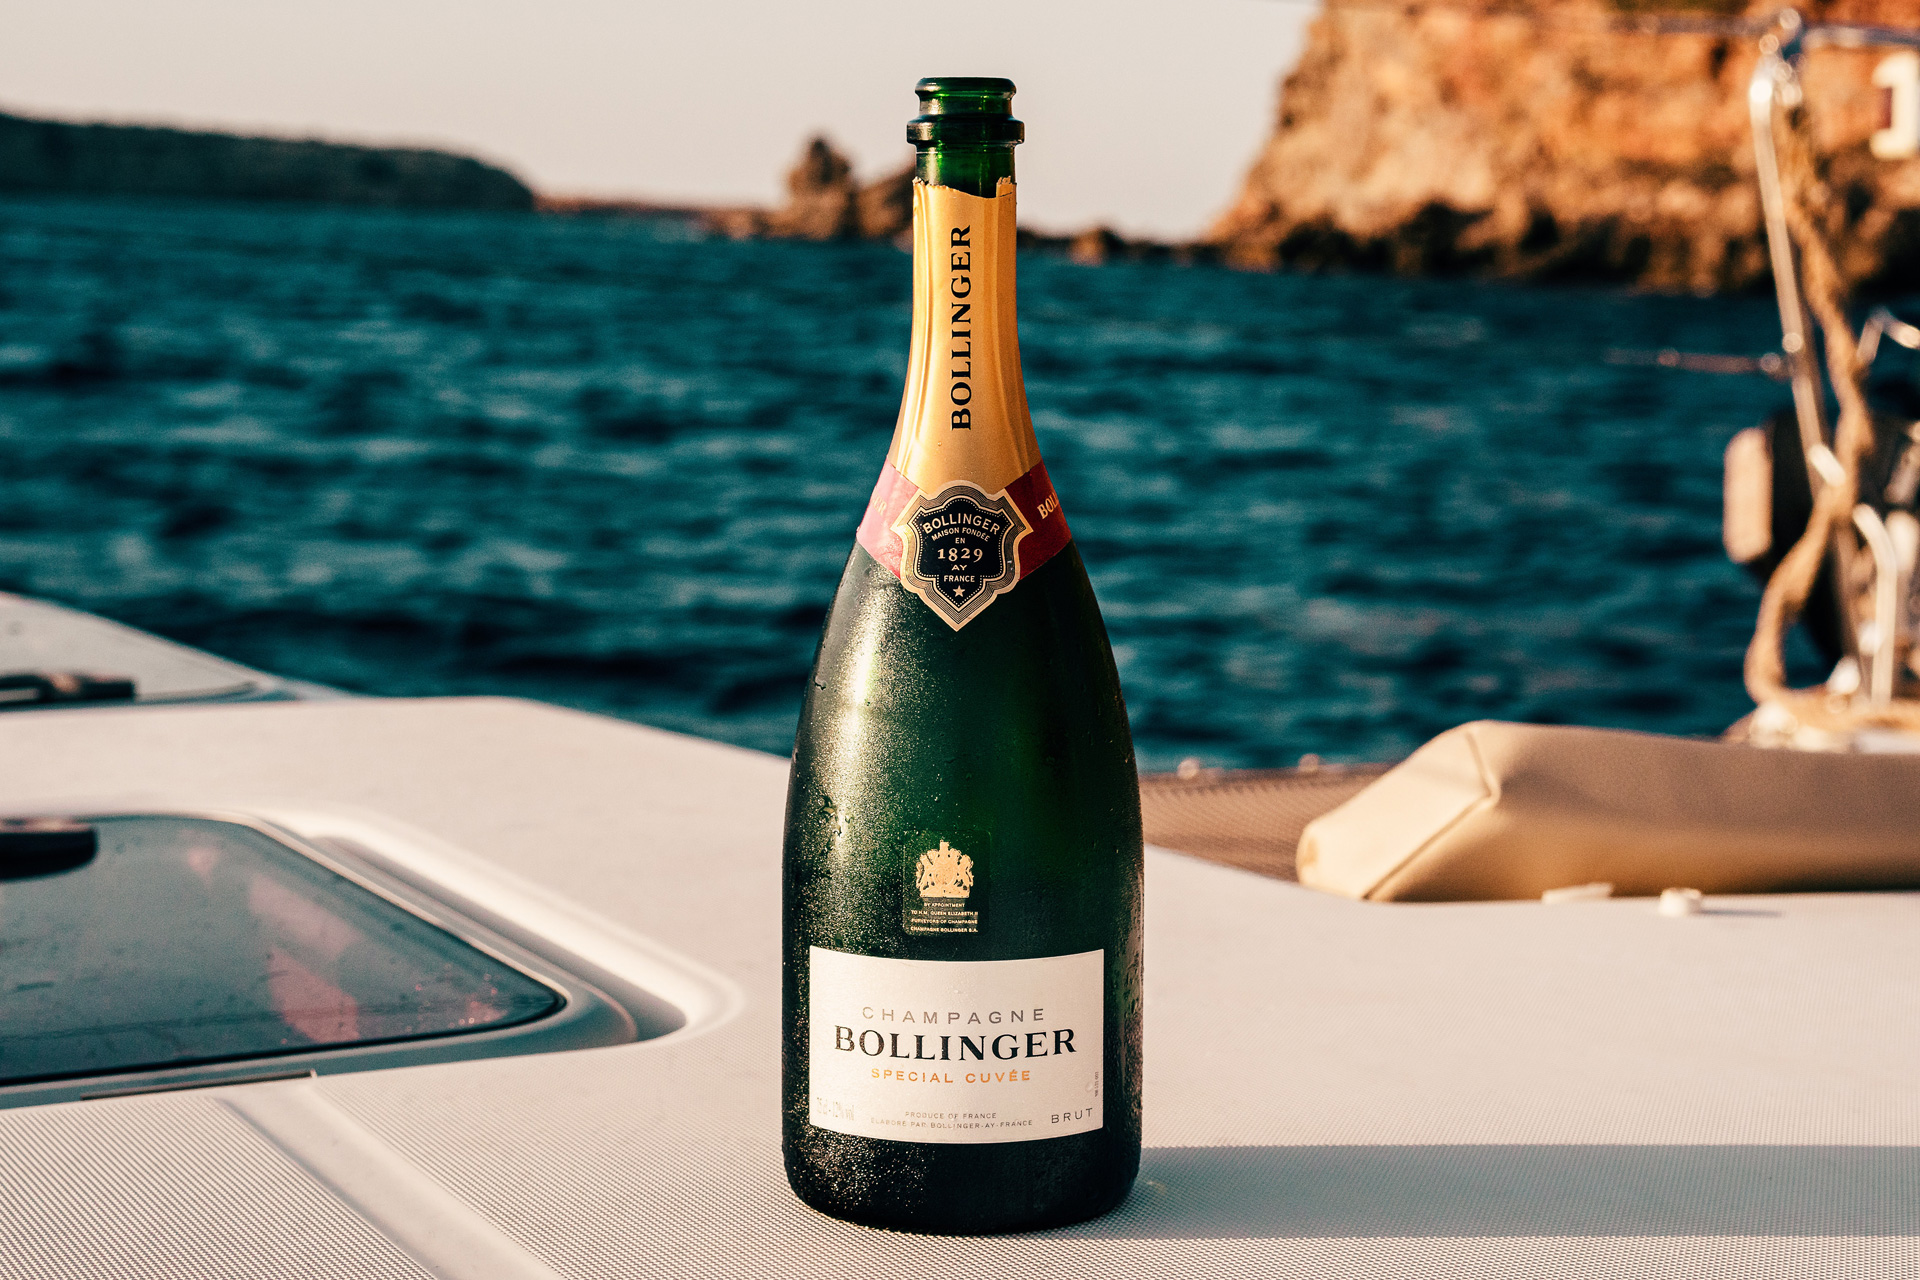 A bottle of Bollinger champagne by the sea